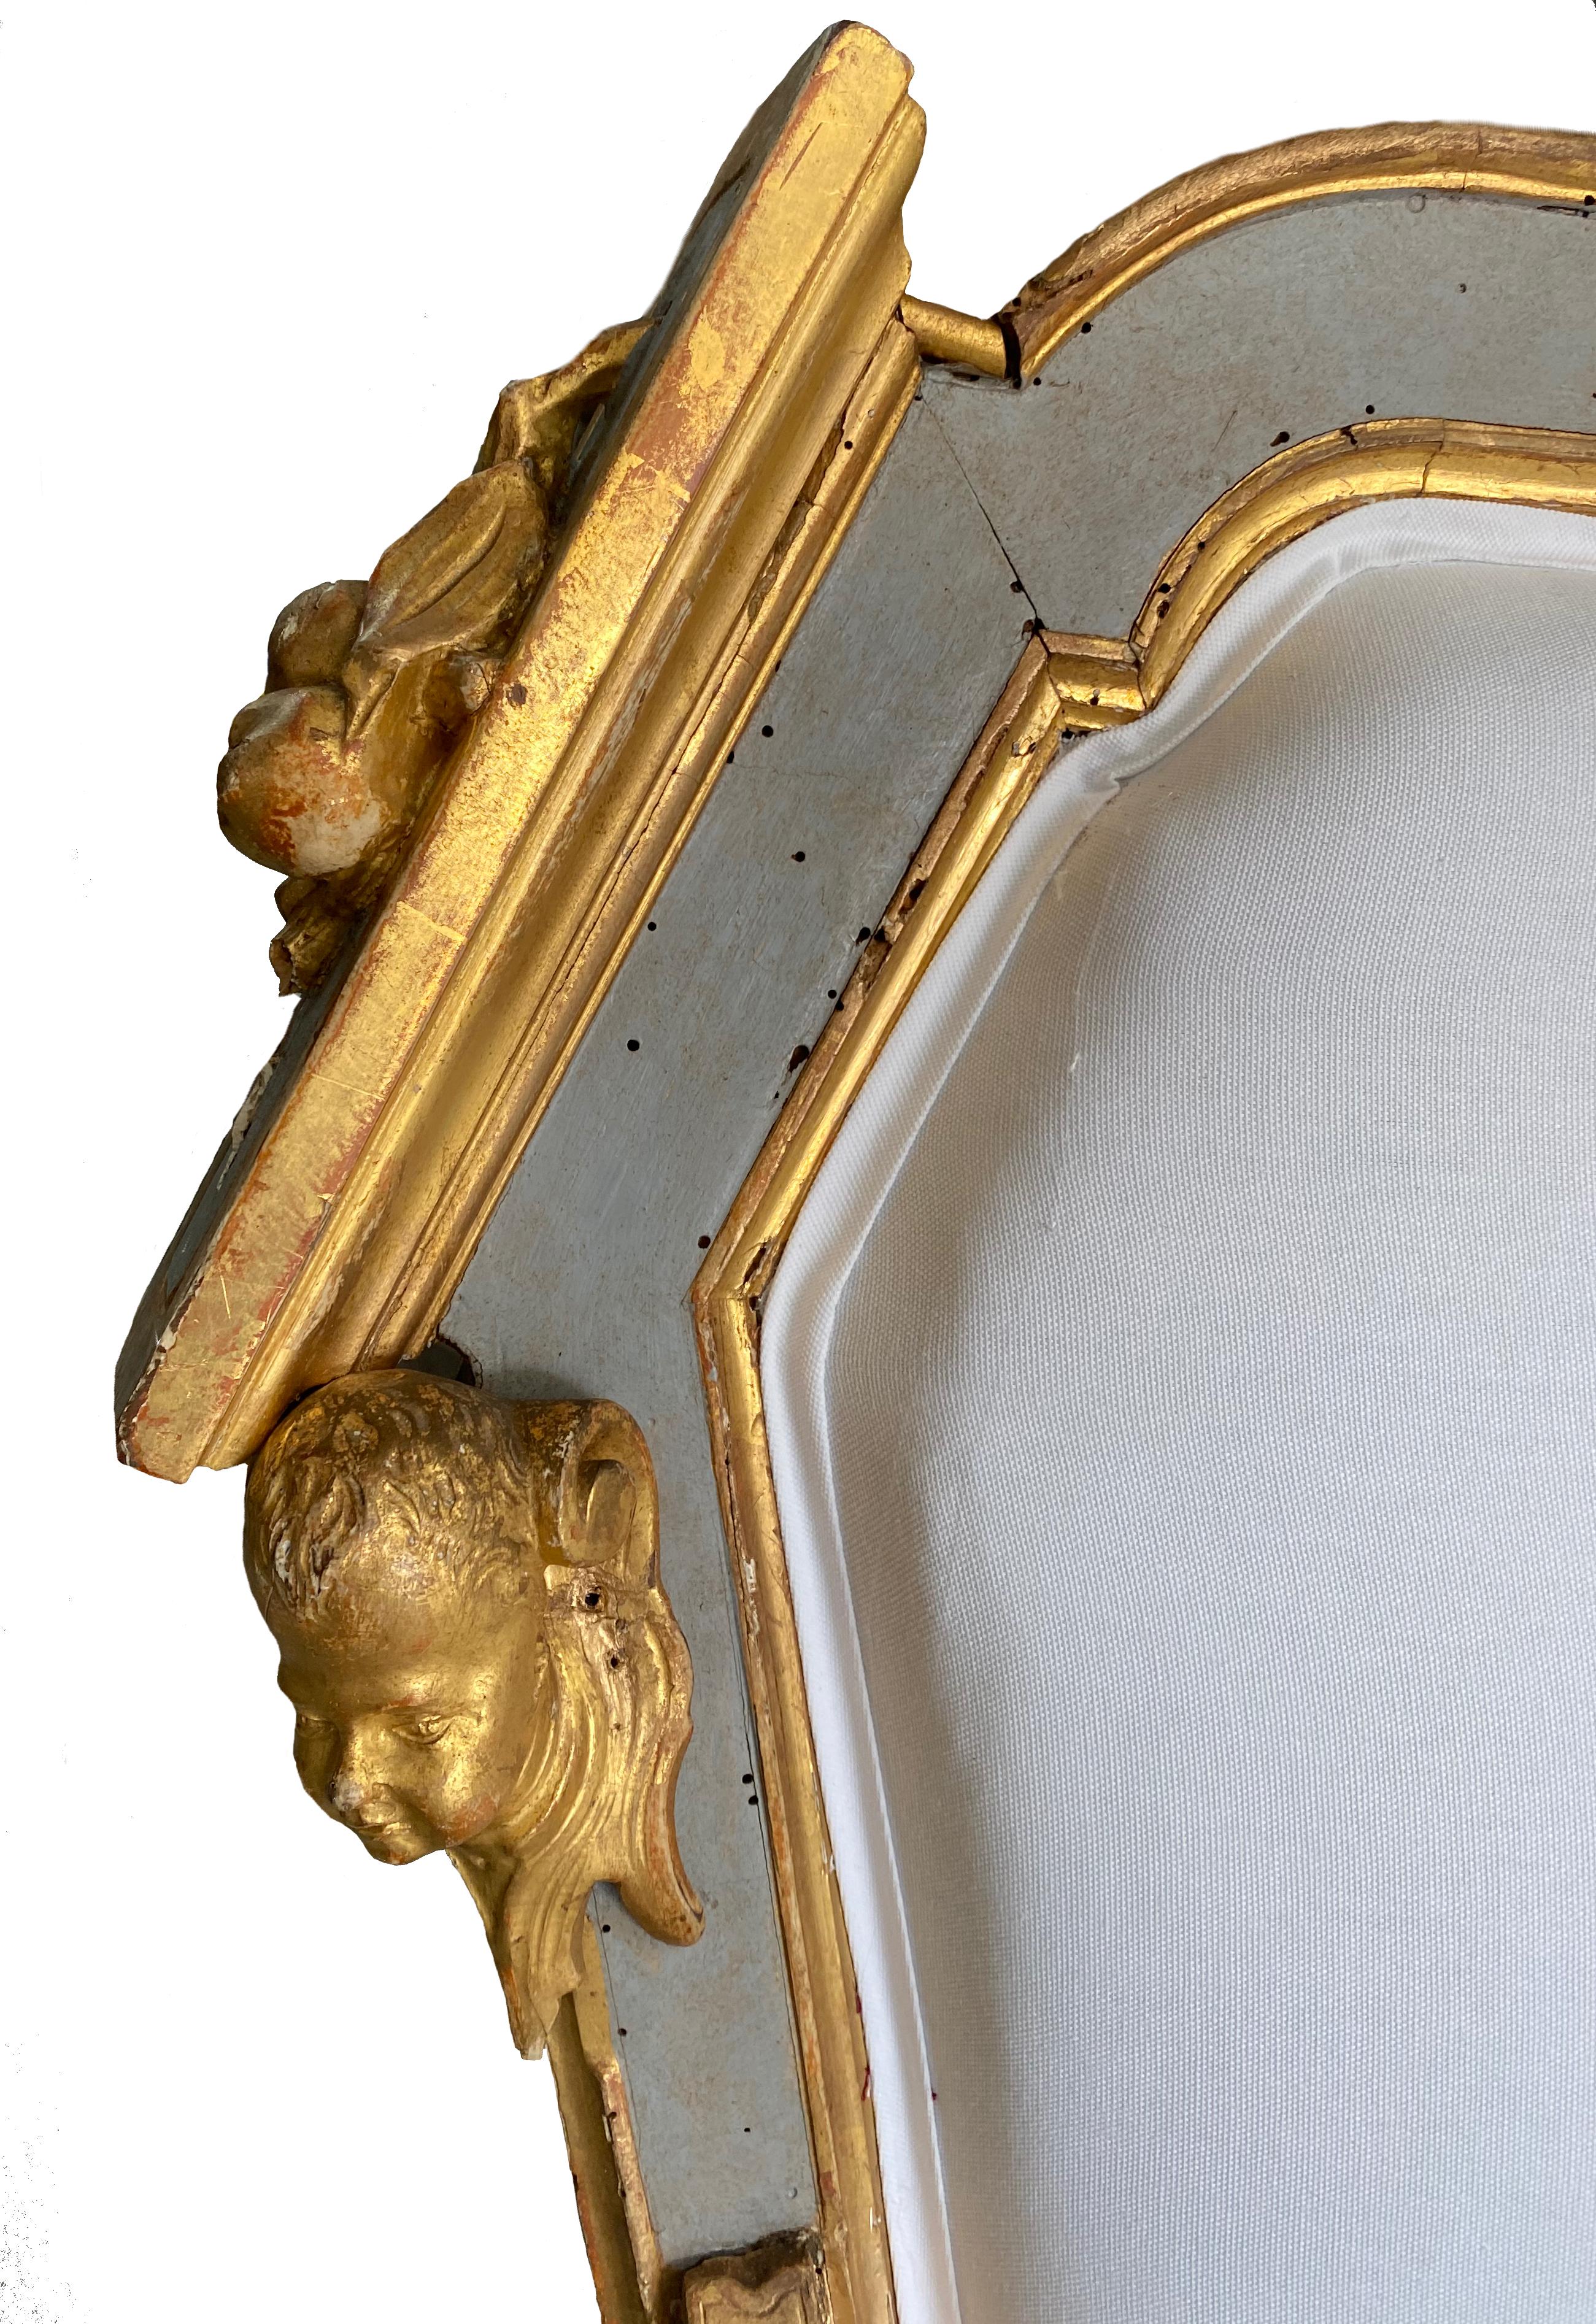 This 18th century settee from Northern Italy will add some major drama to your room. With its ornate details and beautiful blue paint and gilding it is truly one of a kind.